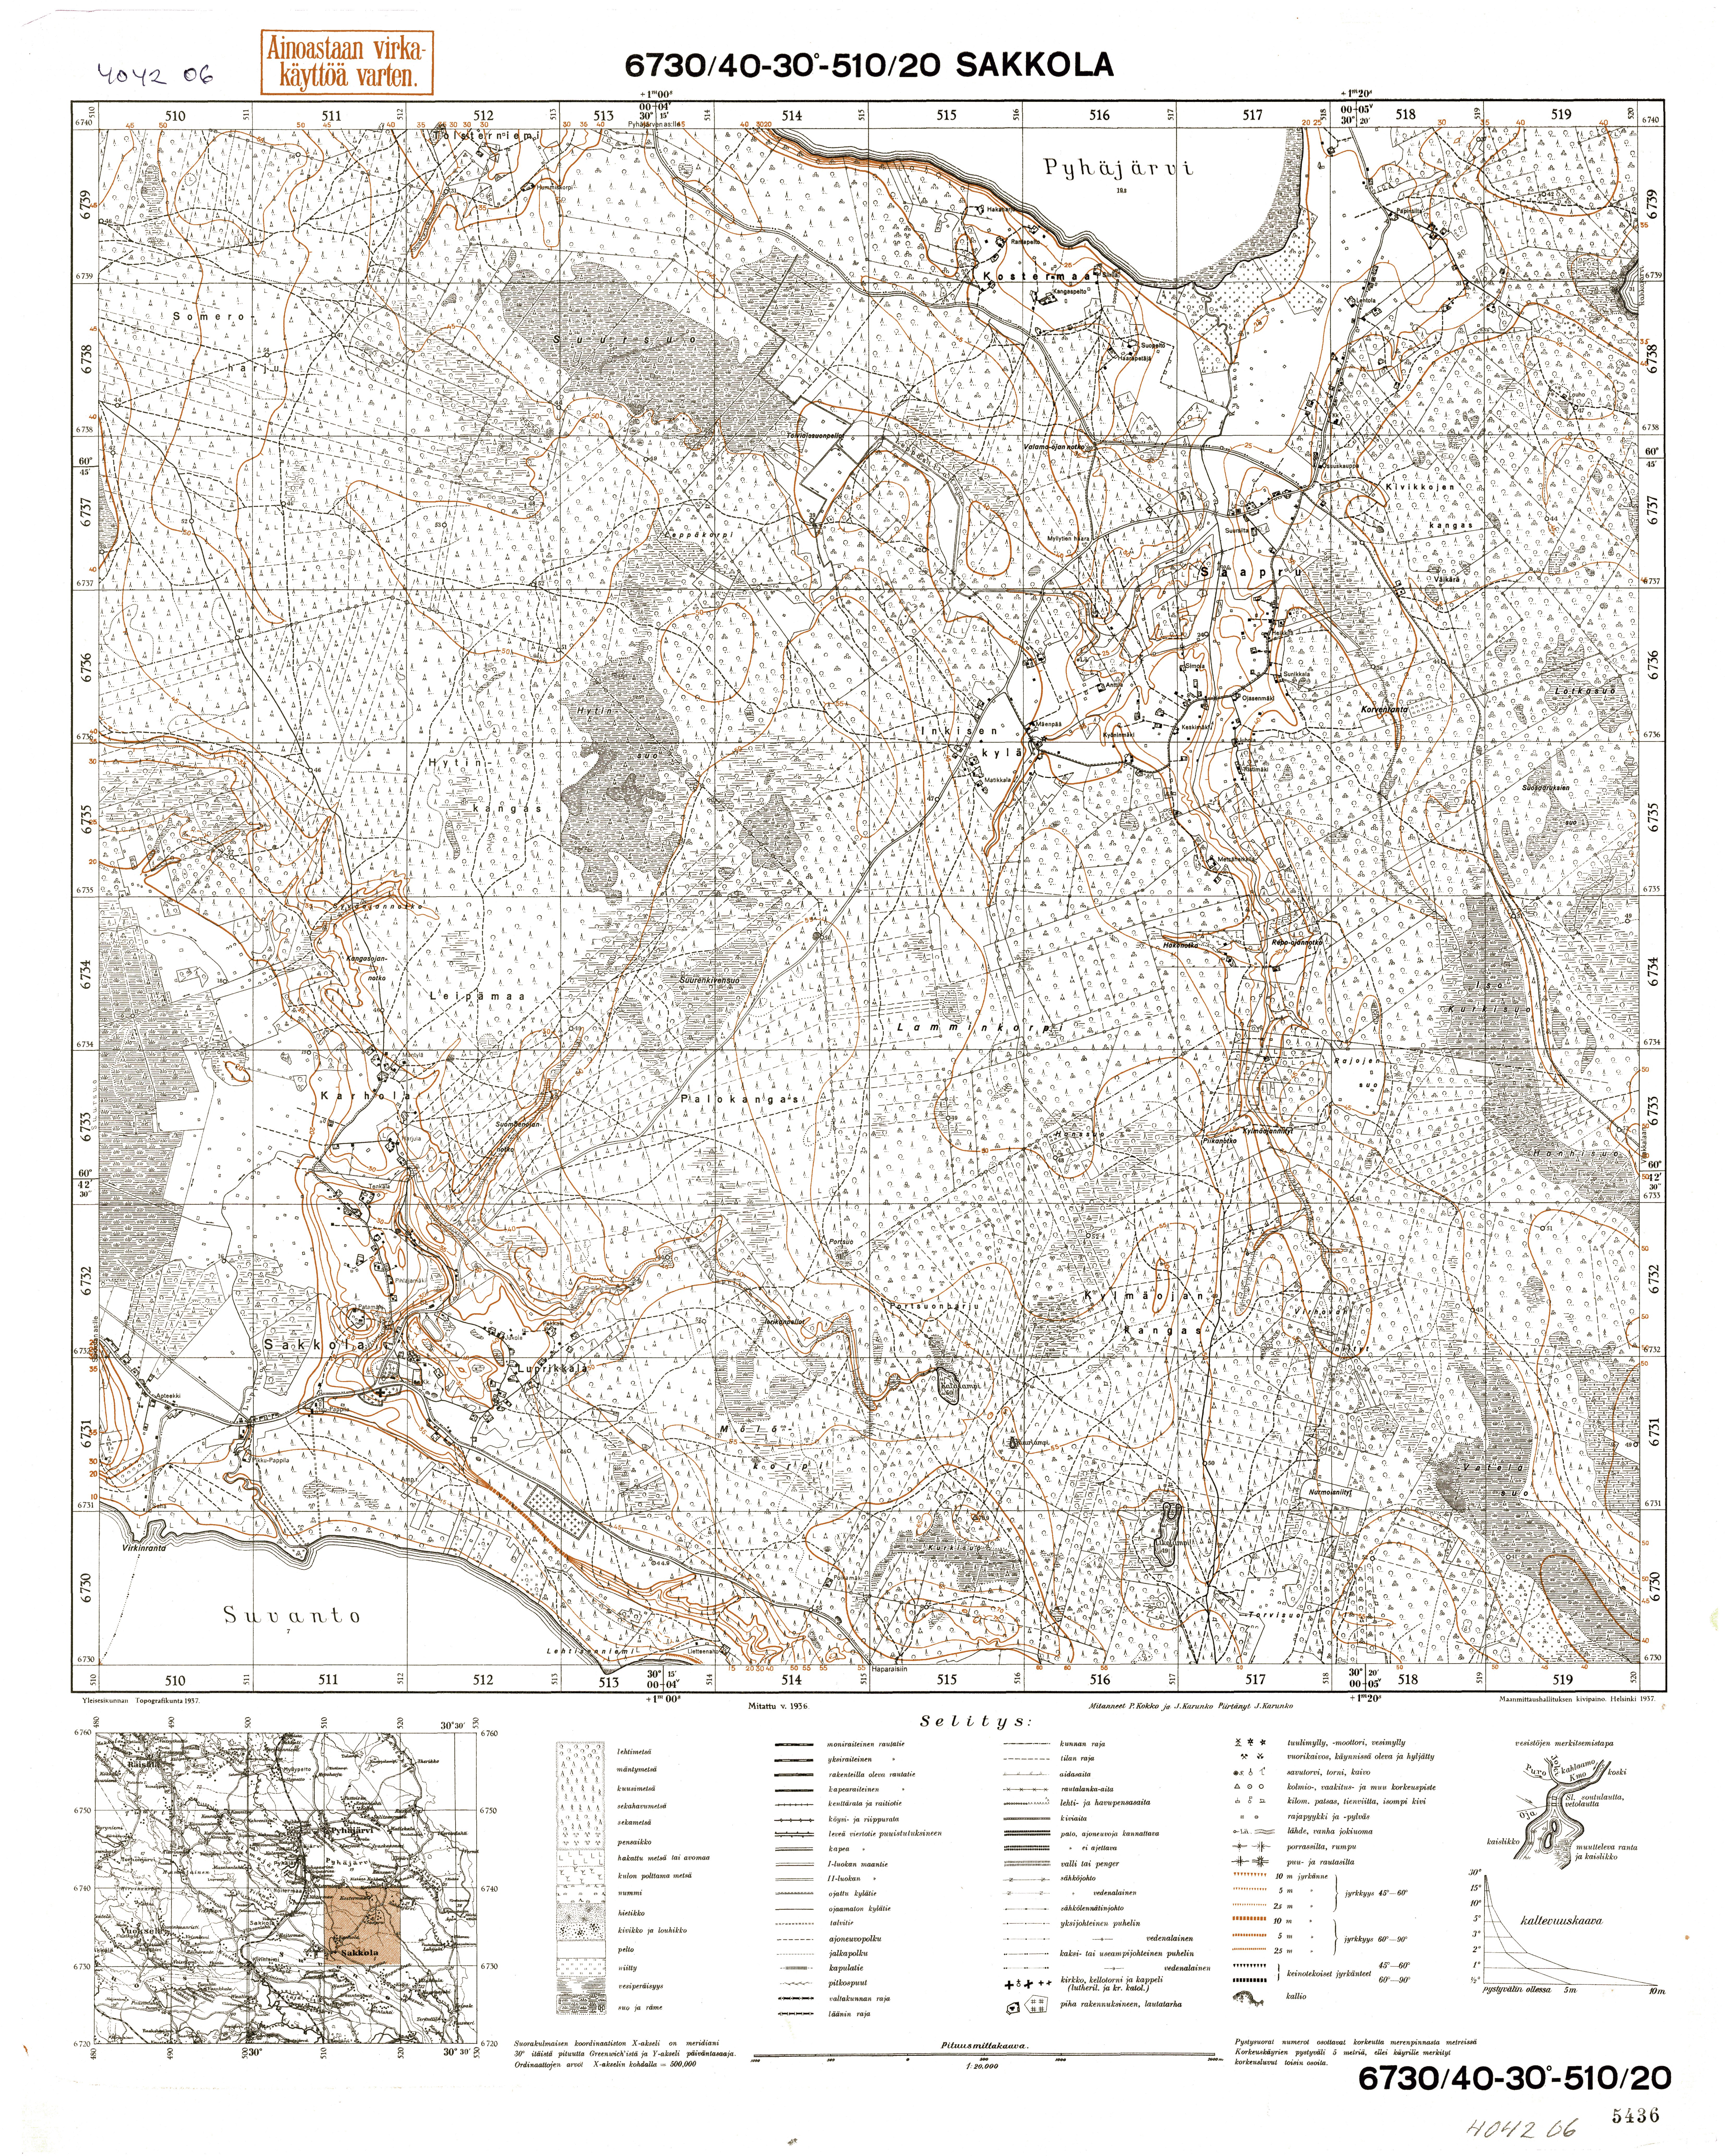 Novinka. Sakkola. Topografikartta 404206. Topographic map from 1937. Use the zooming tool to explore in higher level of detail. Obtain as a quality print or high resolution image